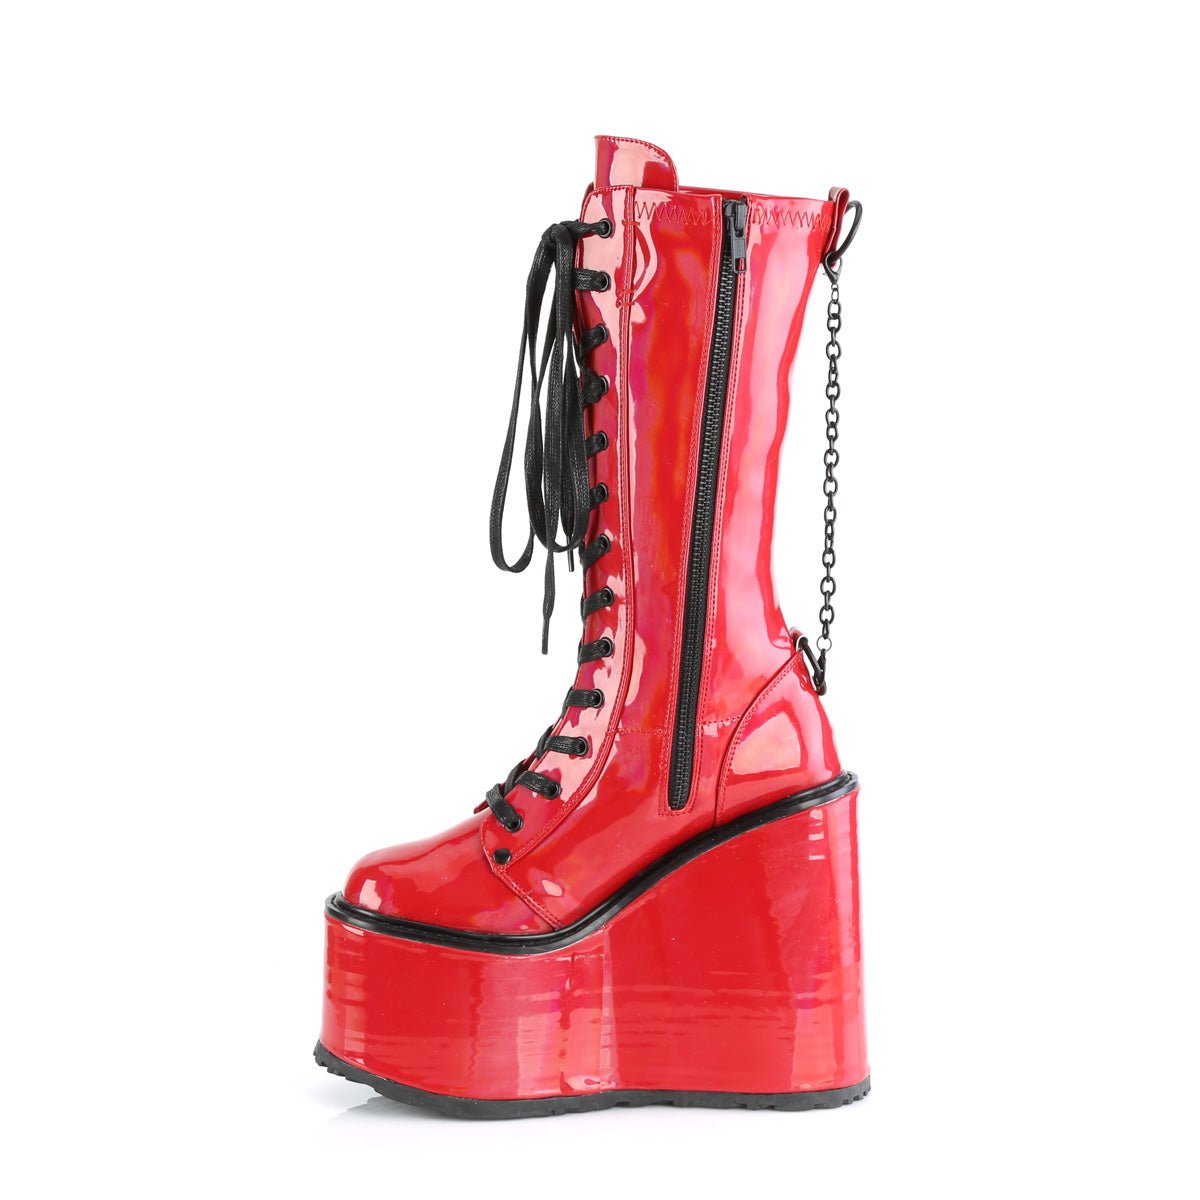 Too Fast | Demonia Swing 150 | Red Holographic Stretch Patent Leather Women's Knee High Boots